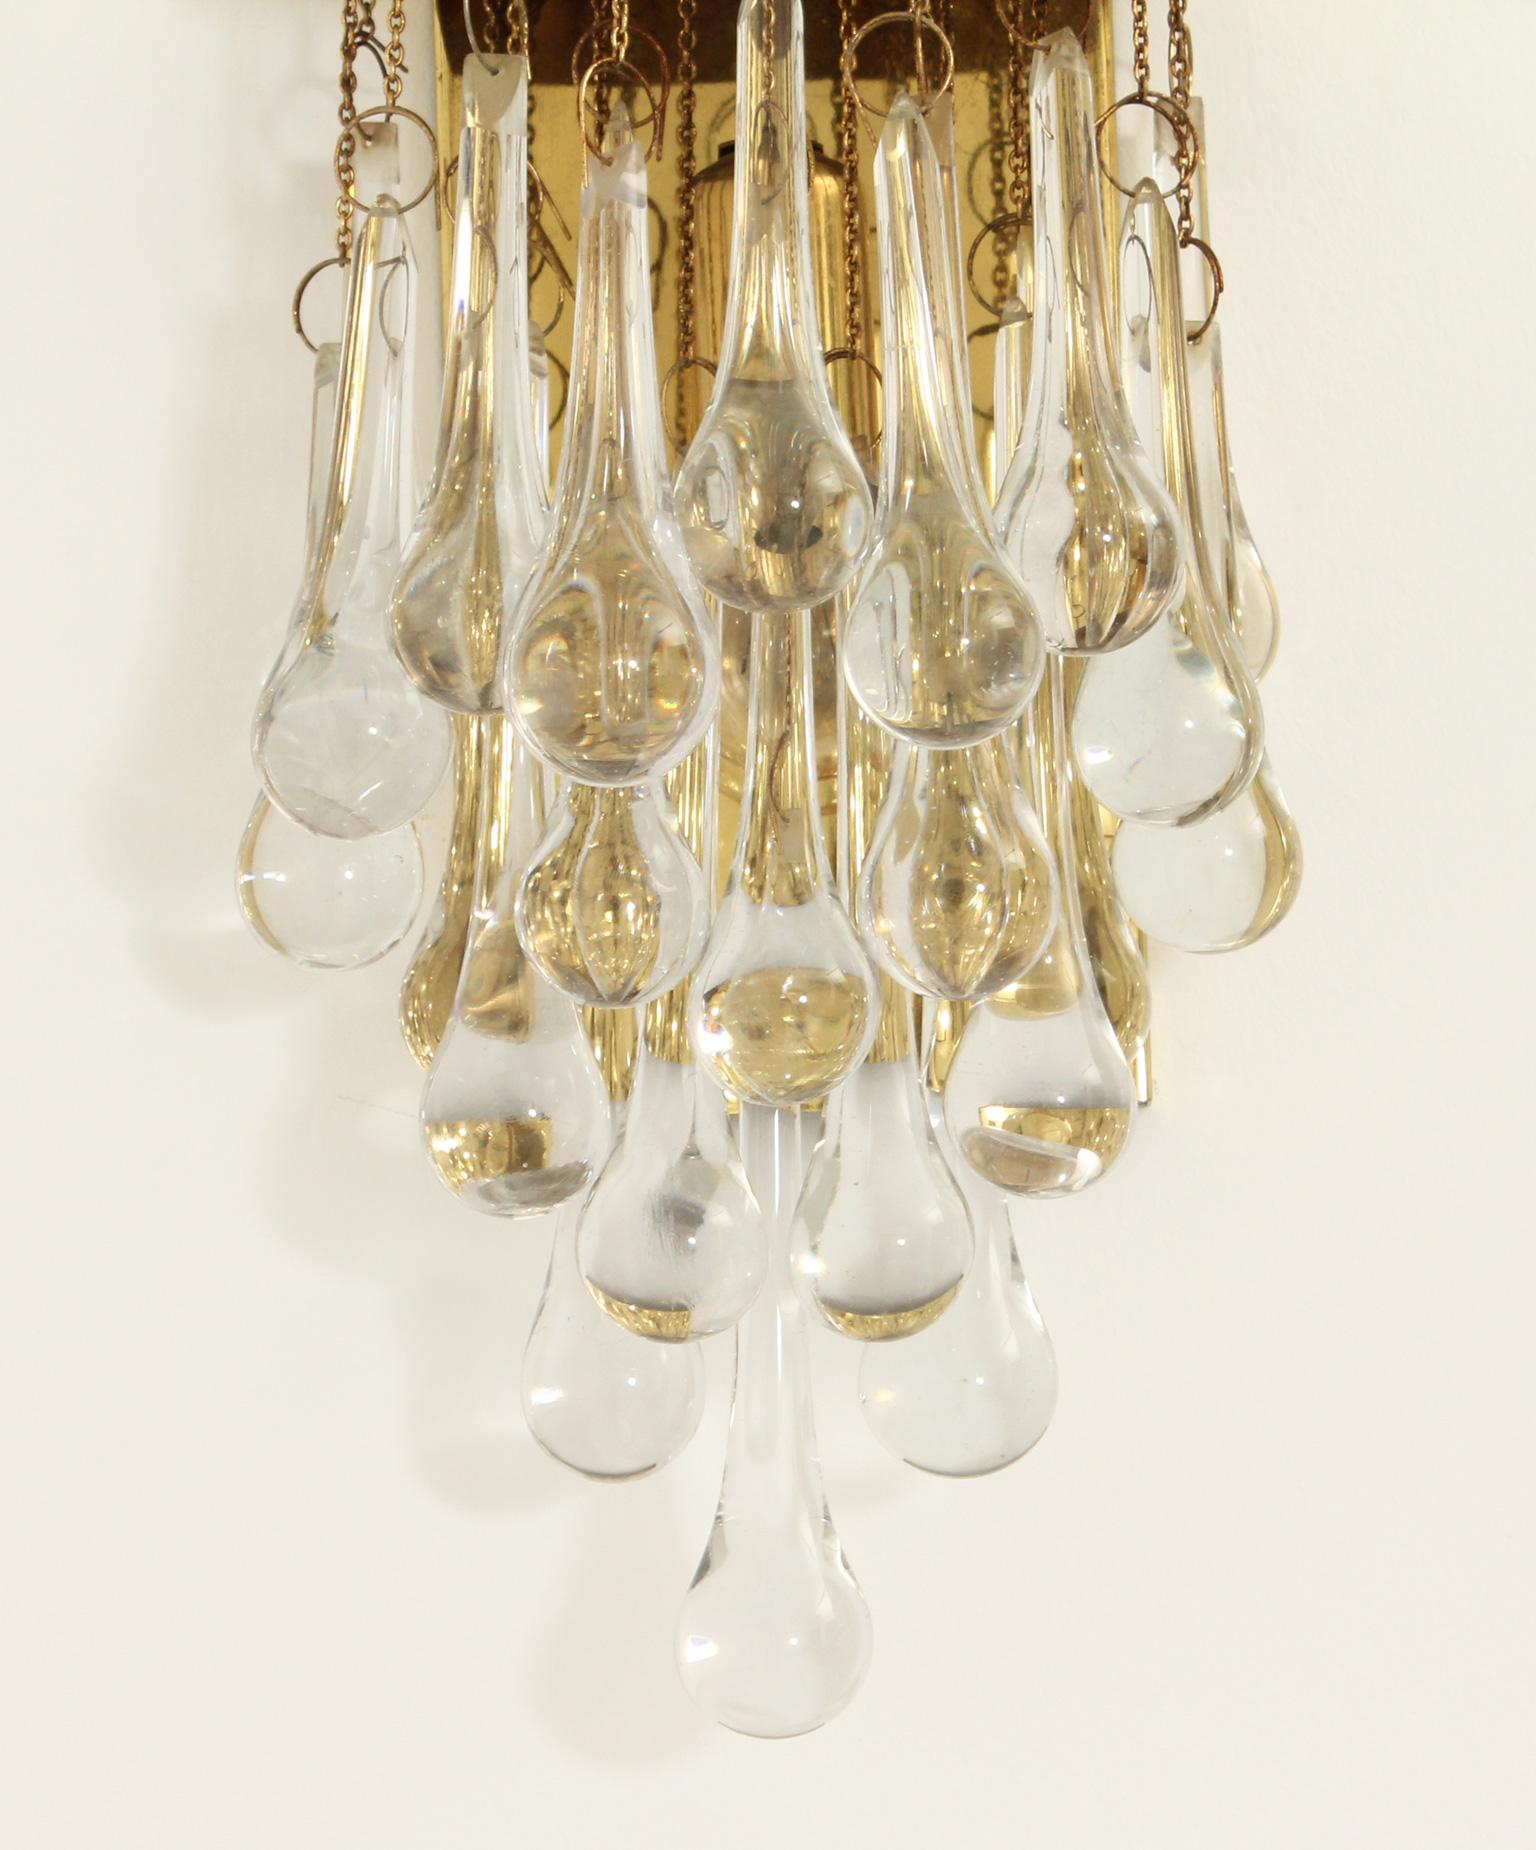 Spanish Pair of Brass and Glass Teardrop Sconces by Lumica, Spain, 1970's